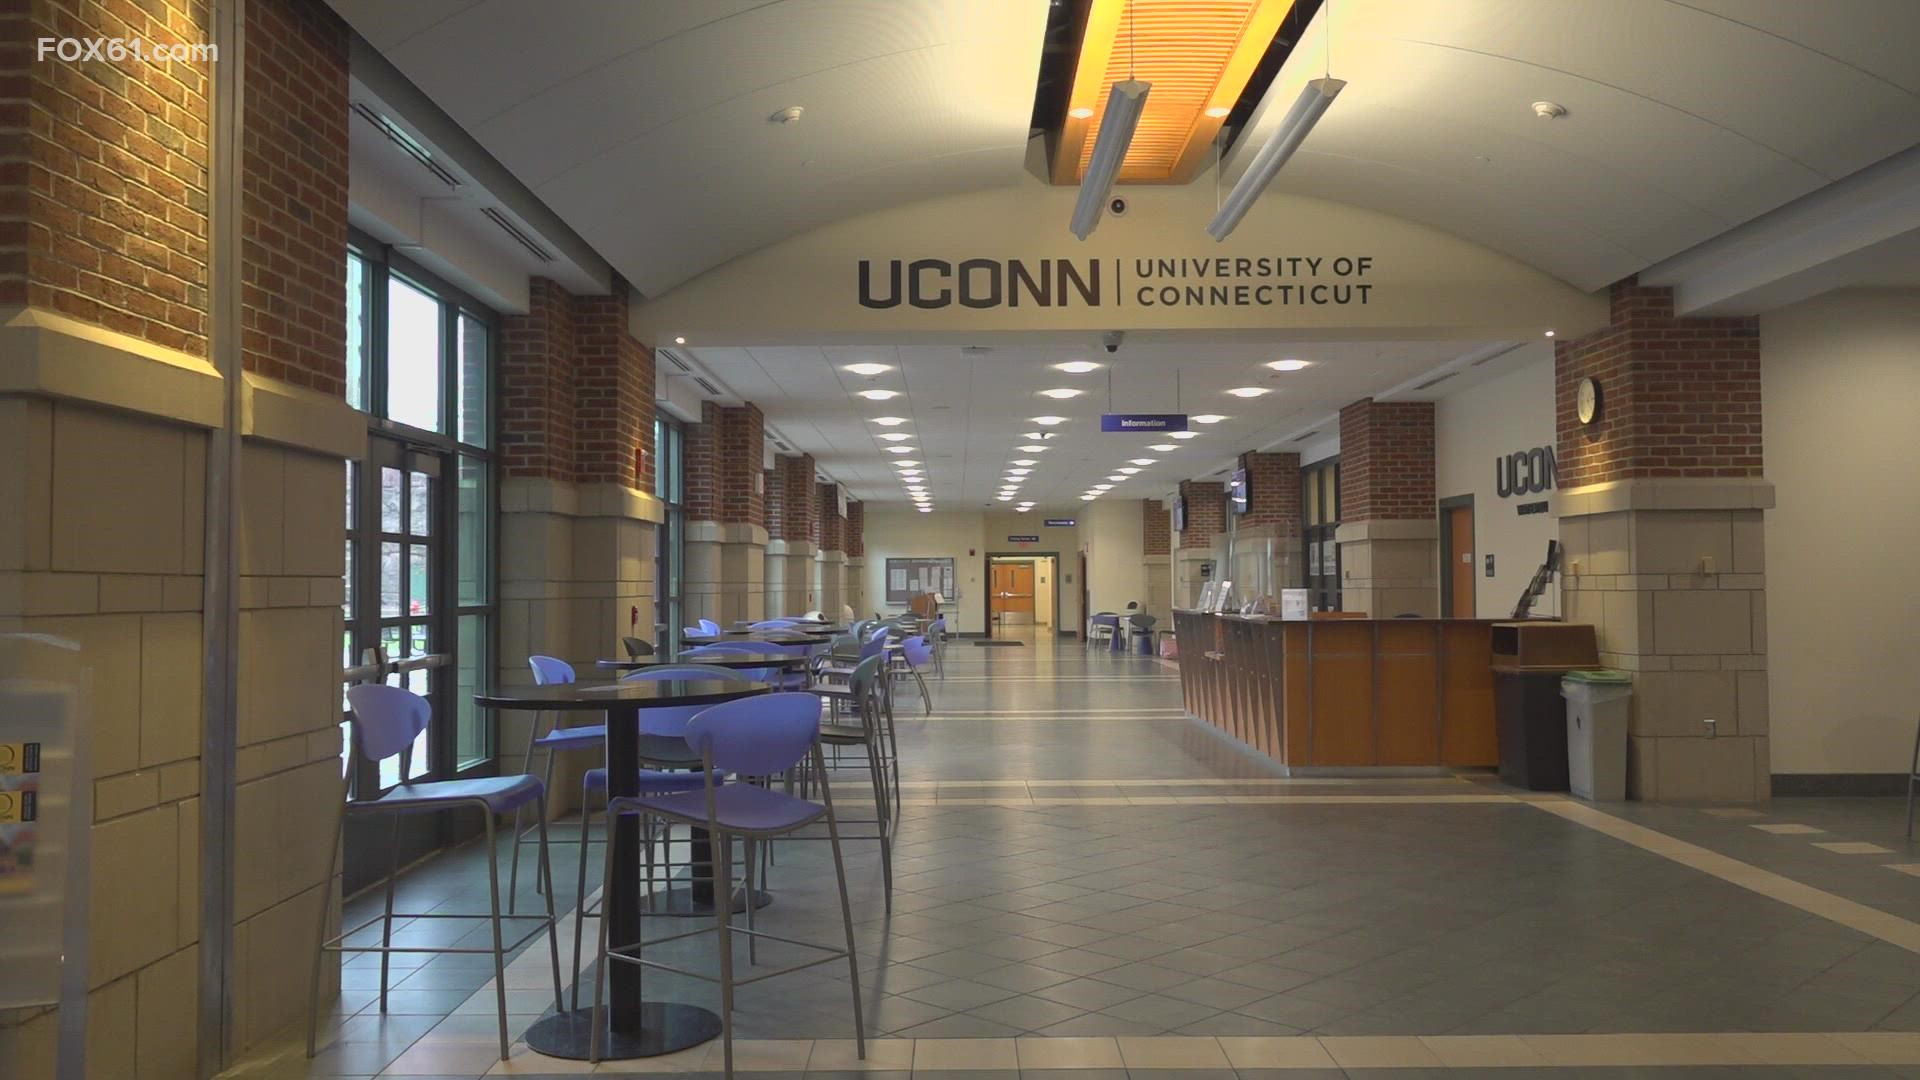 Alleviating financial barriers that come with pursuing higher education. City of Waterbury and its Board of Ed launched "Waterbury Promise" and partnered with UConn.